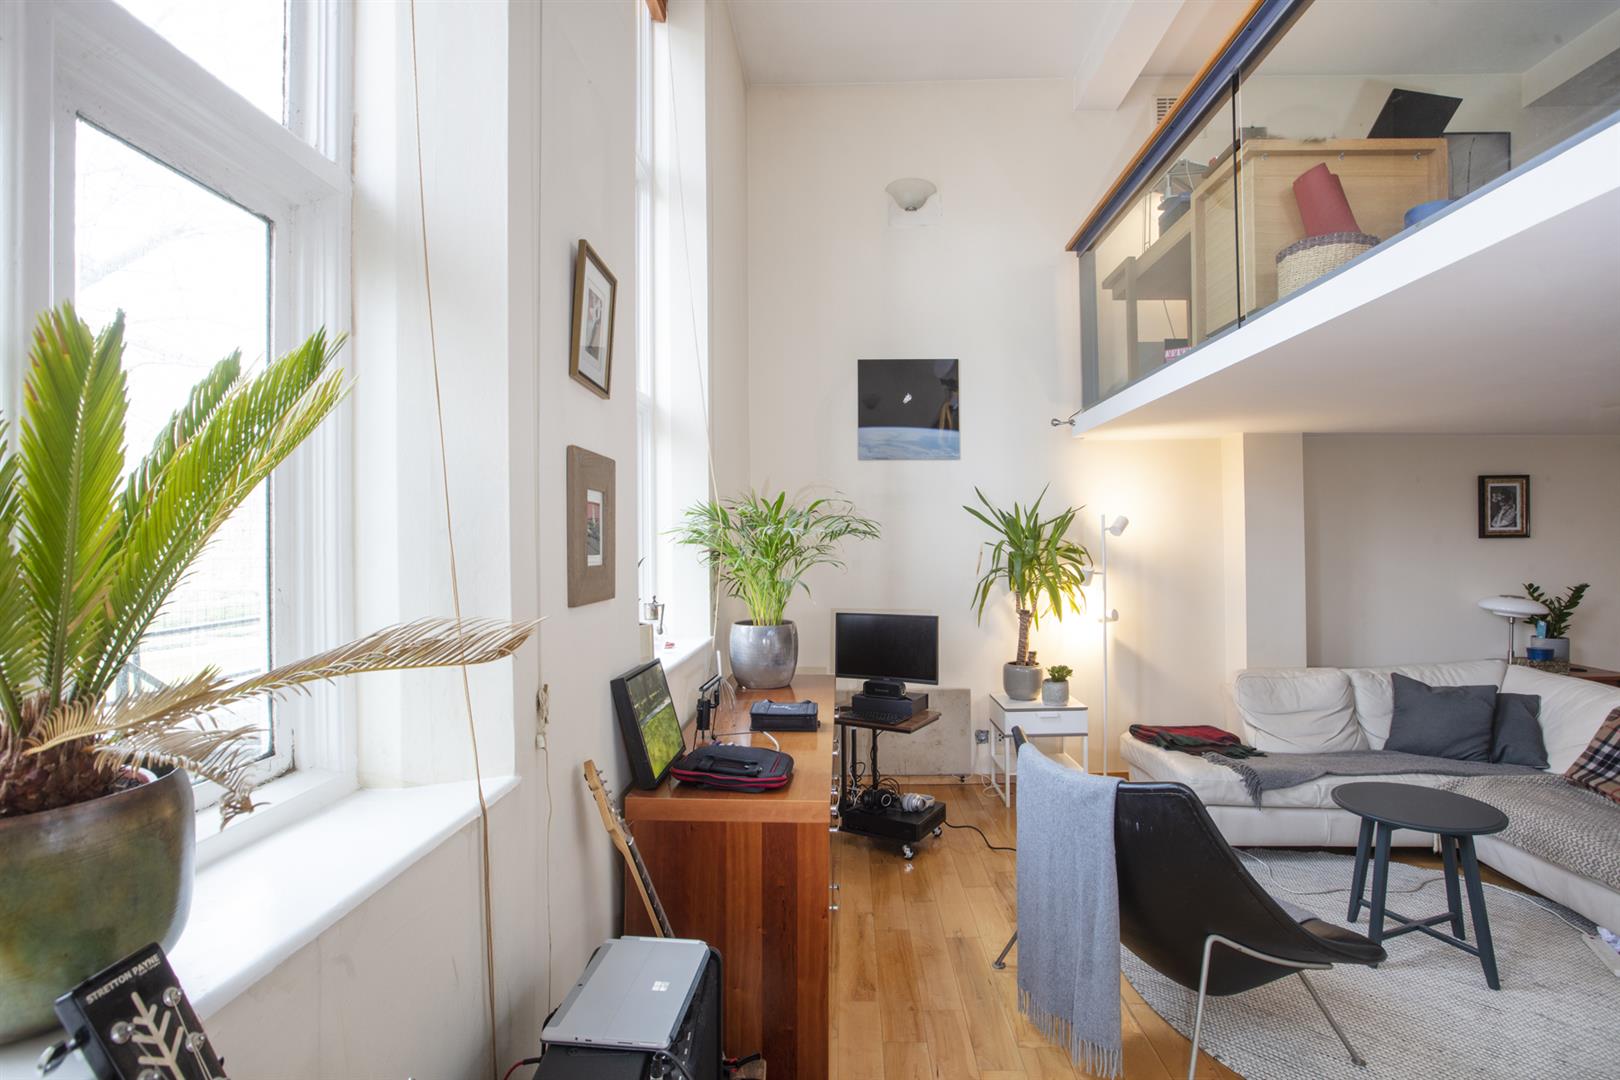 Flat - Conversion For Sale in Cormont Road, Camberwell, SE5 924 view9